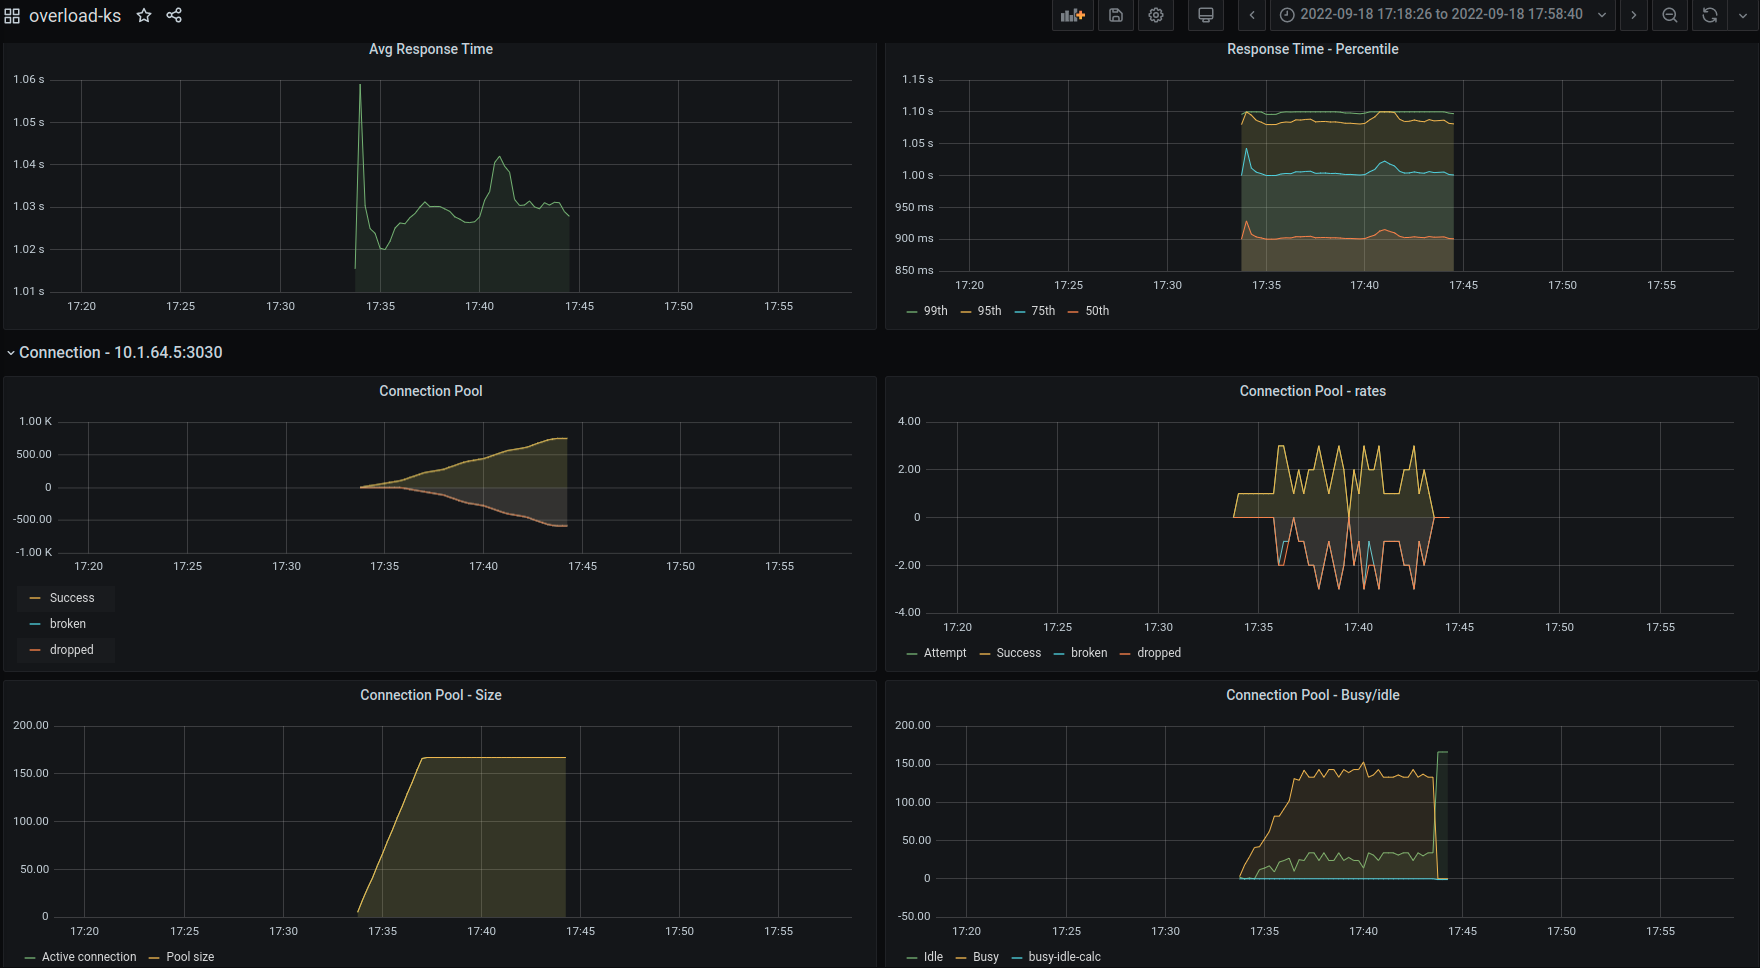 Grafana Dashboard - ResponseTime, Connection pool